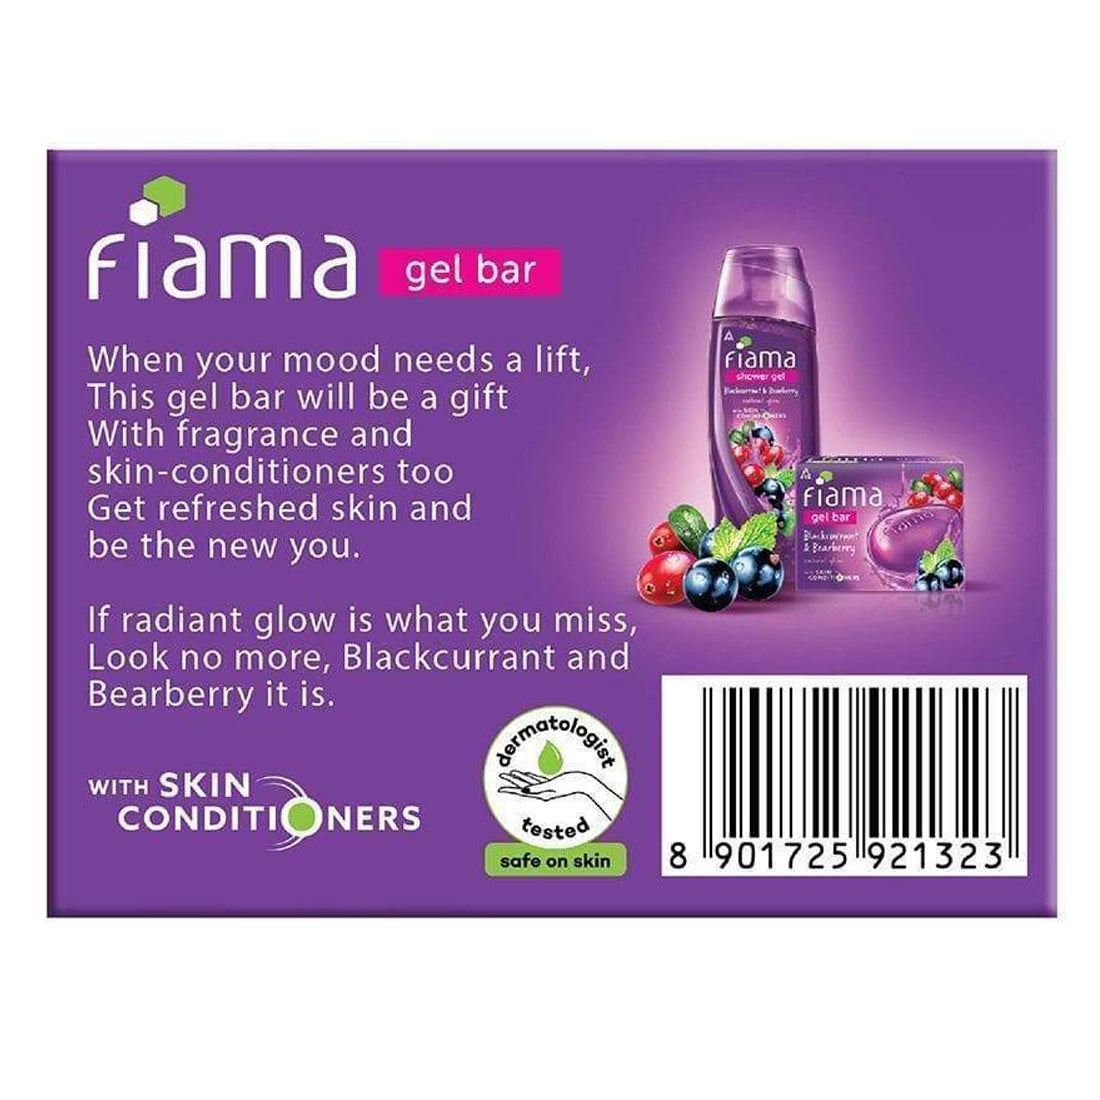 Fiama Gel Bar Blackcurrant And Bearberry Radiant Glow 125gm Pack Of 2